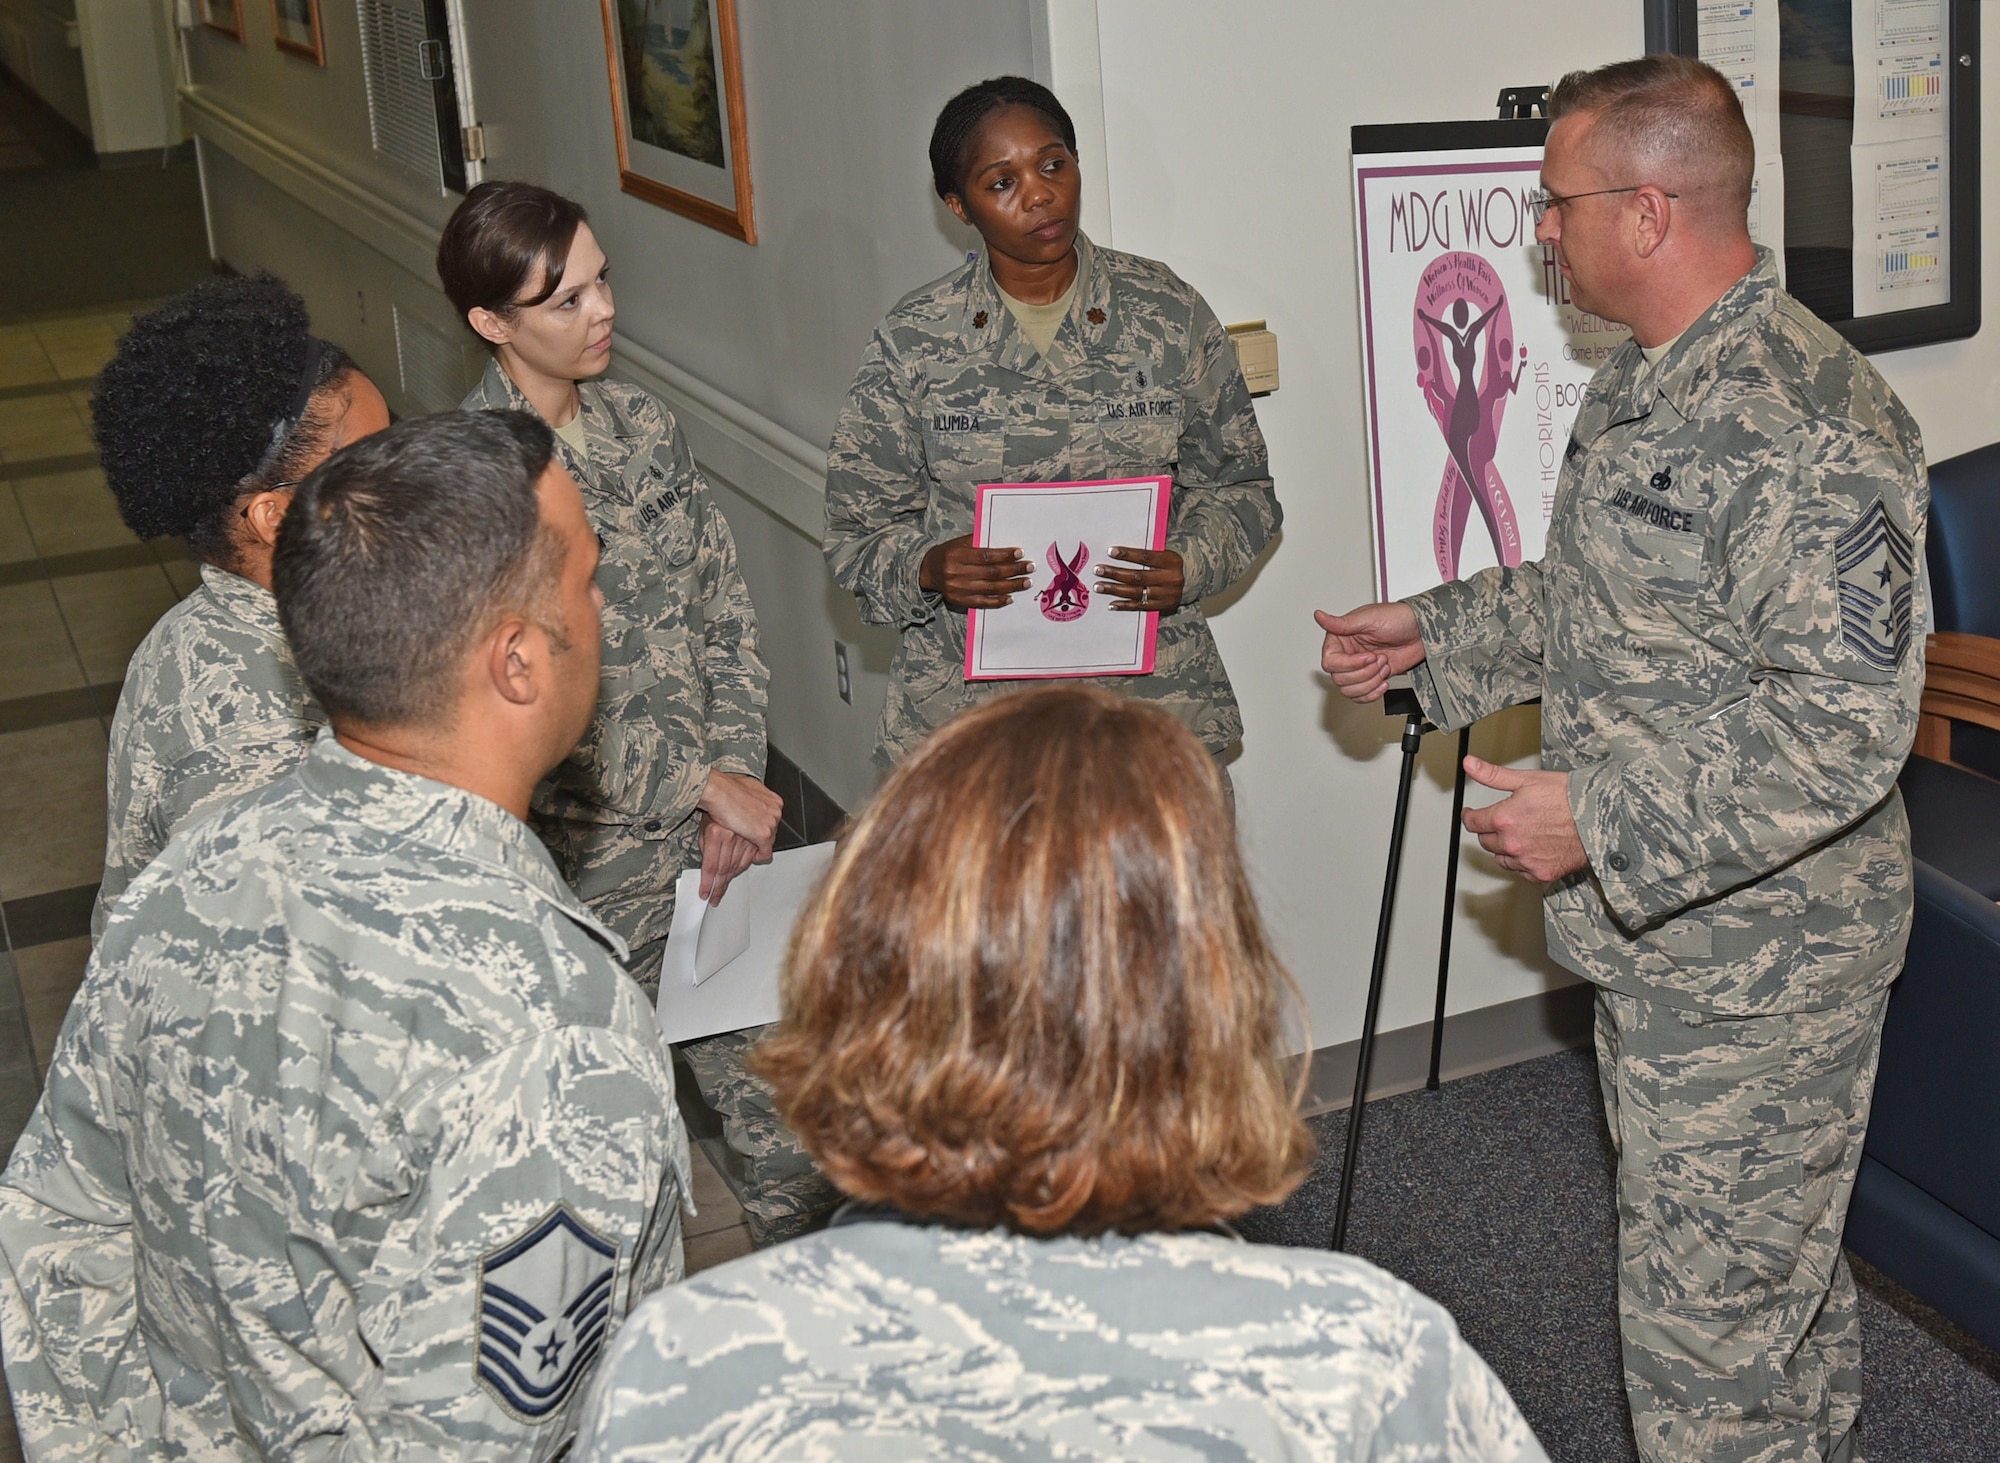 U.S. Air Force Chief Master Sgt. David W. Wade, 9th Air Force command chief at Shaw Air Force Base, S.C., briefs the Tyndall Air Force Base, Fla., 325th Medical Group members Aug. 29, 2017. Wade spent time at different units talking with Airmen and highlighting their place in the profession of arms and how their efforts affect the Tyndall mission. (U.S. Air Force photo by Senior Airman Sergio A. Gamboa/Released)